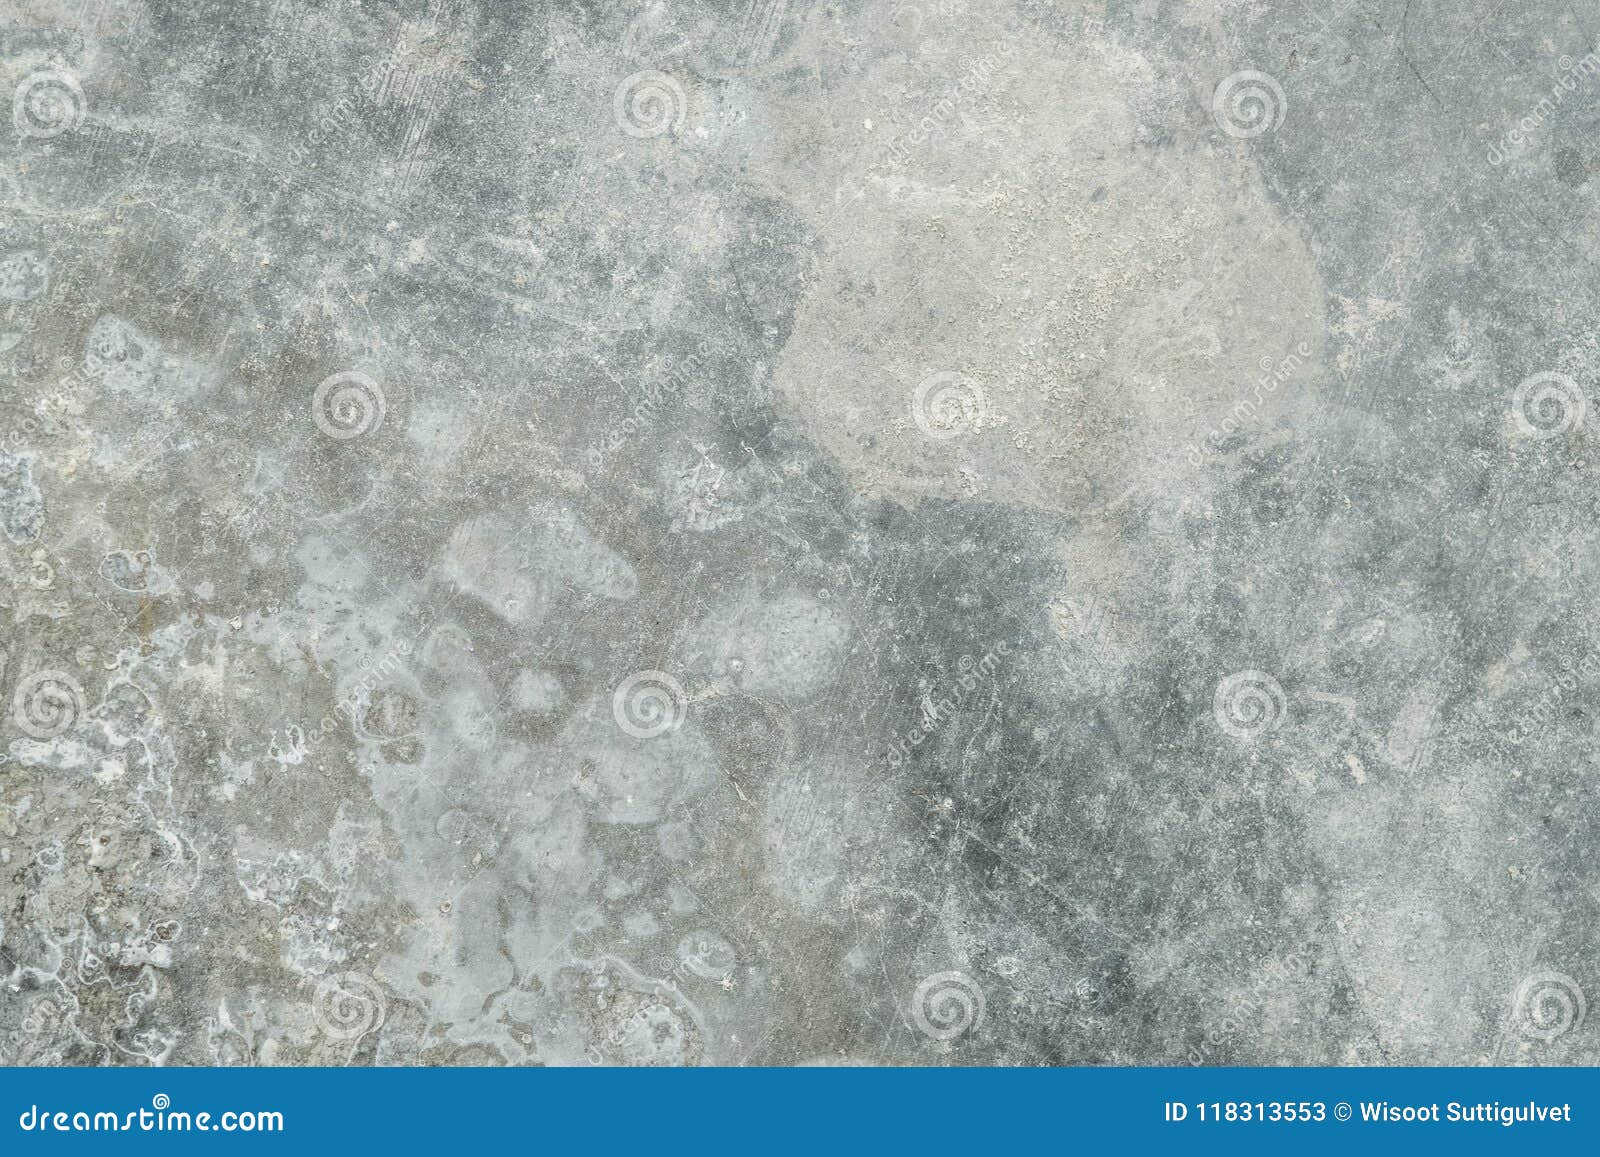 zinc galvanized grunge metal texture. old galvanised steel background. close-up of a gray zinc plate